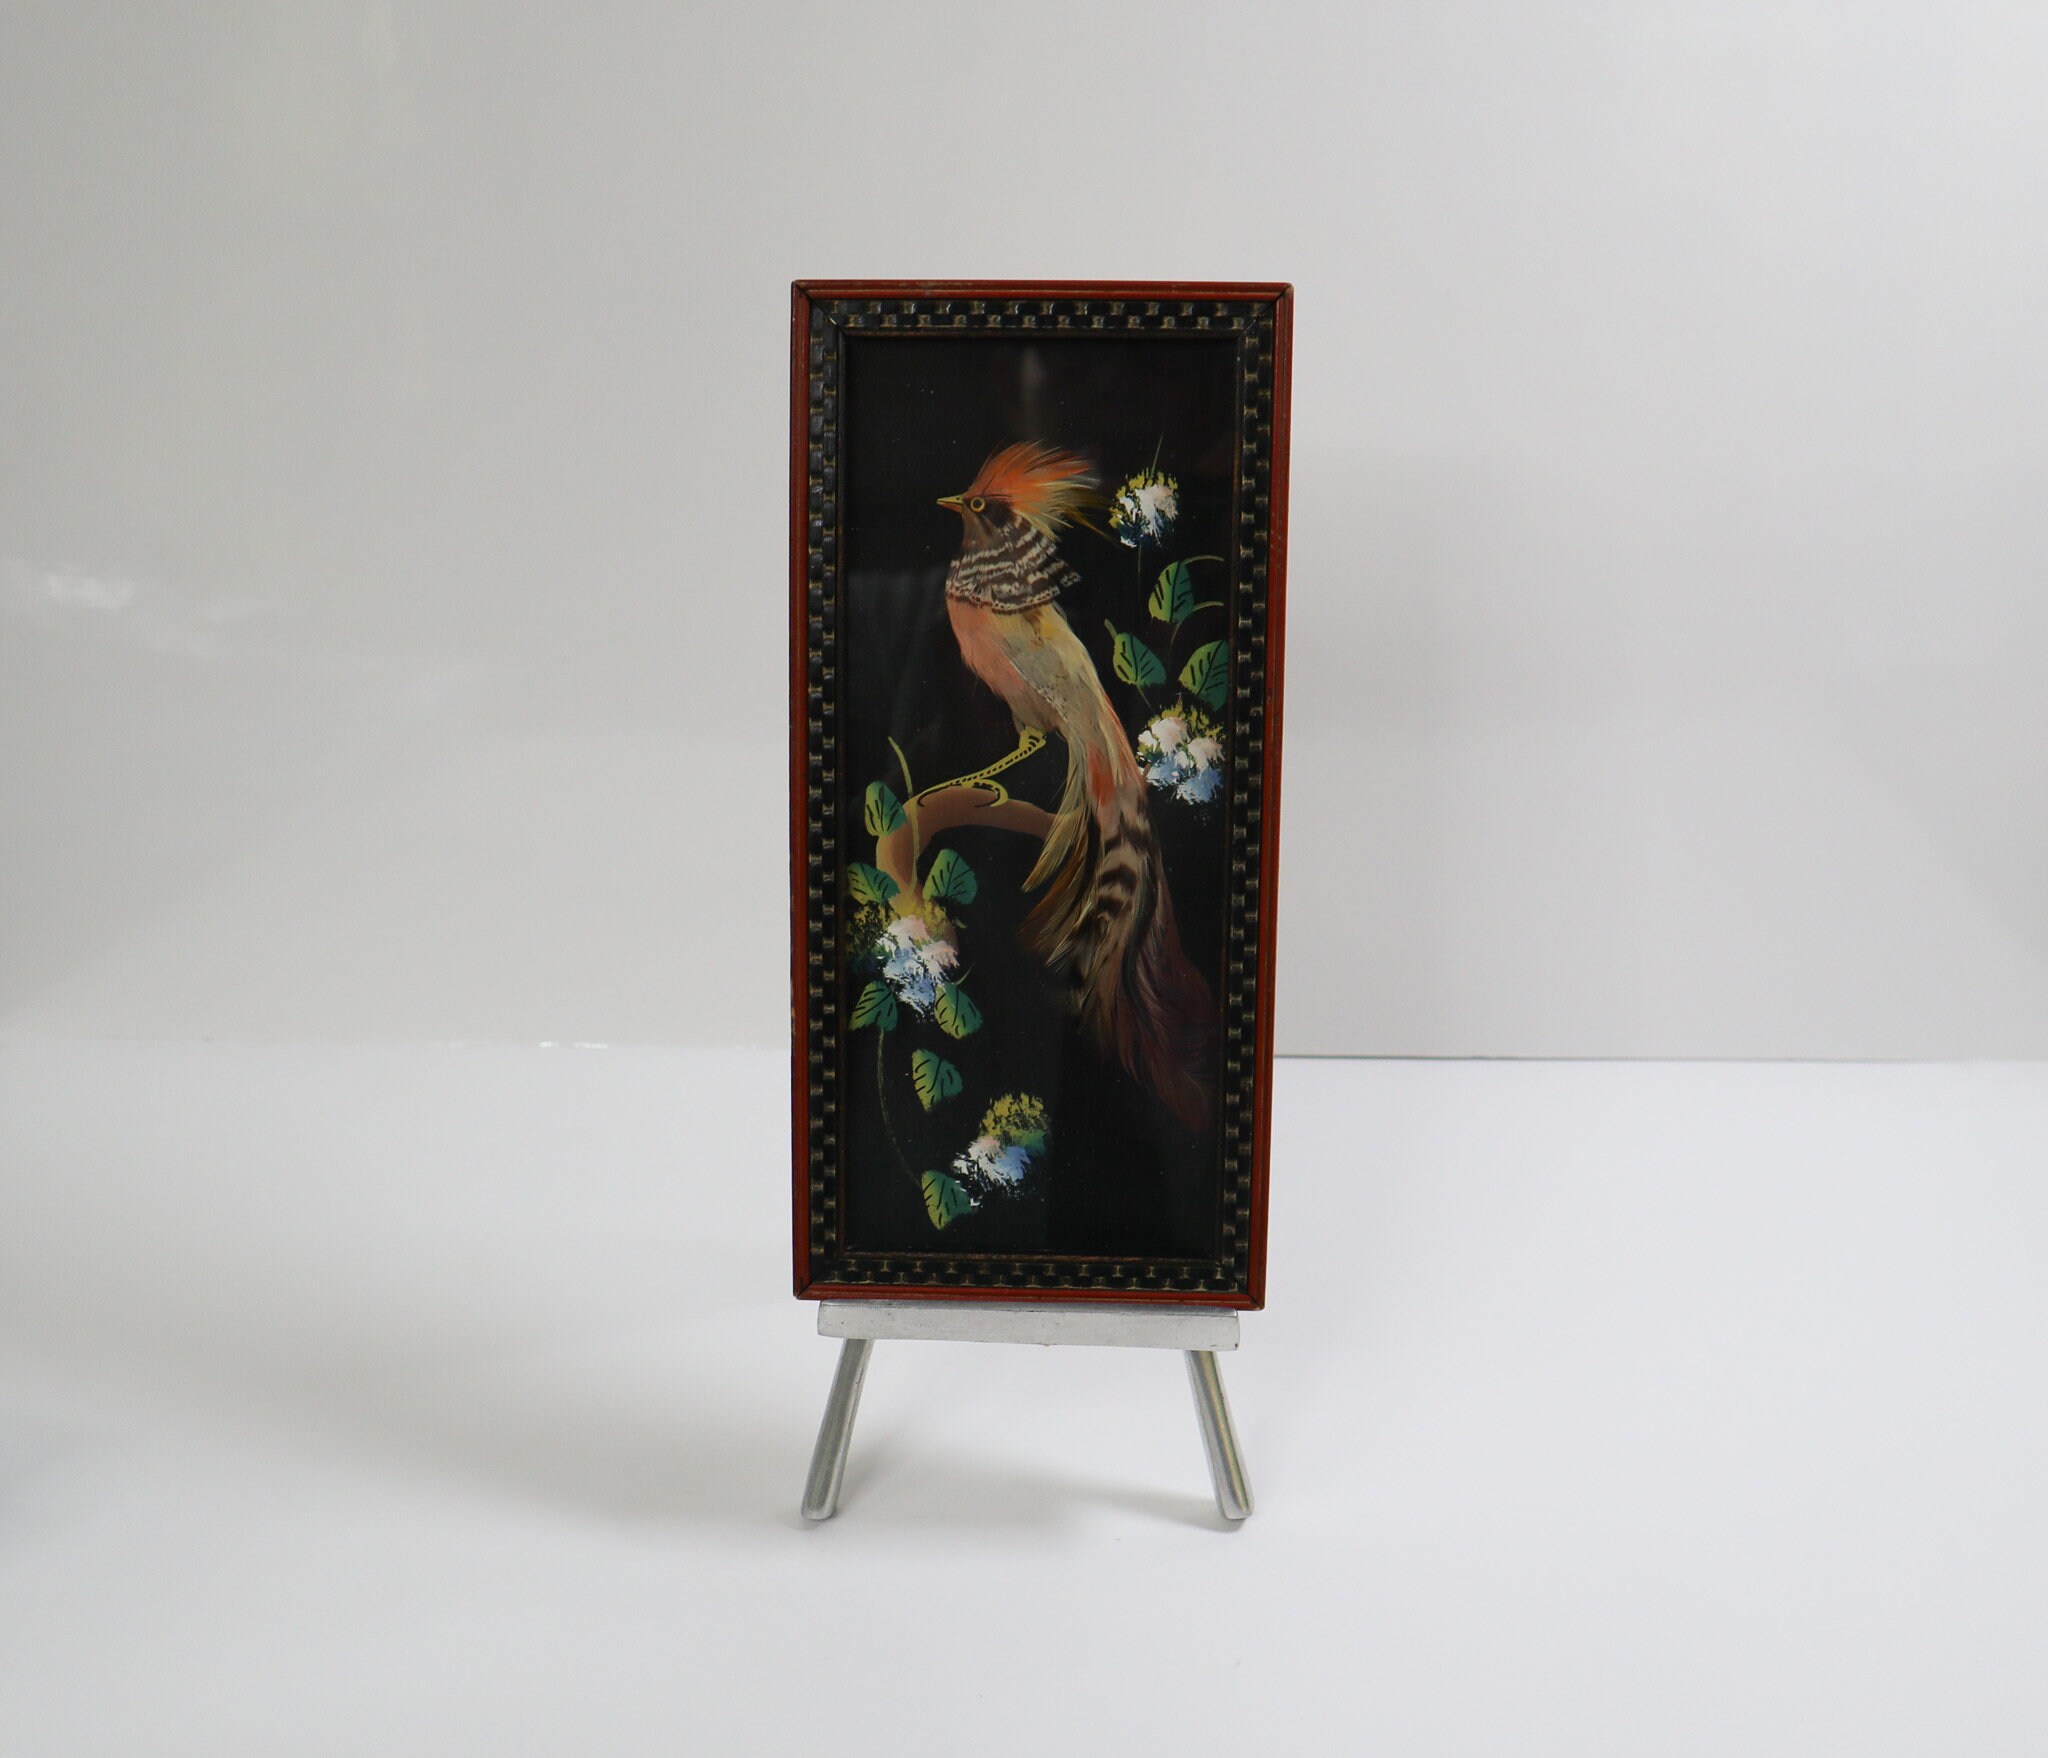 Intricate Reticulated Silver Picture Frame Easel Stand